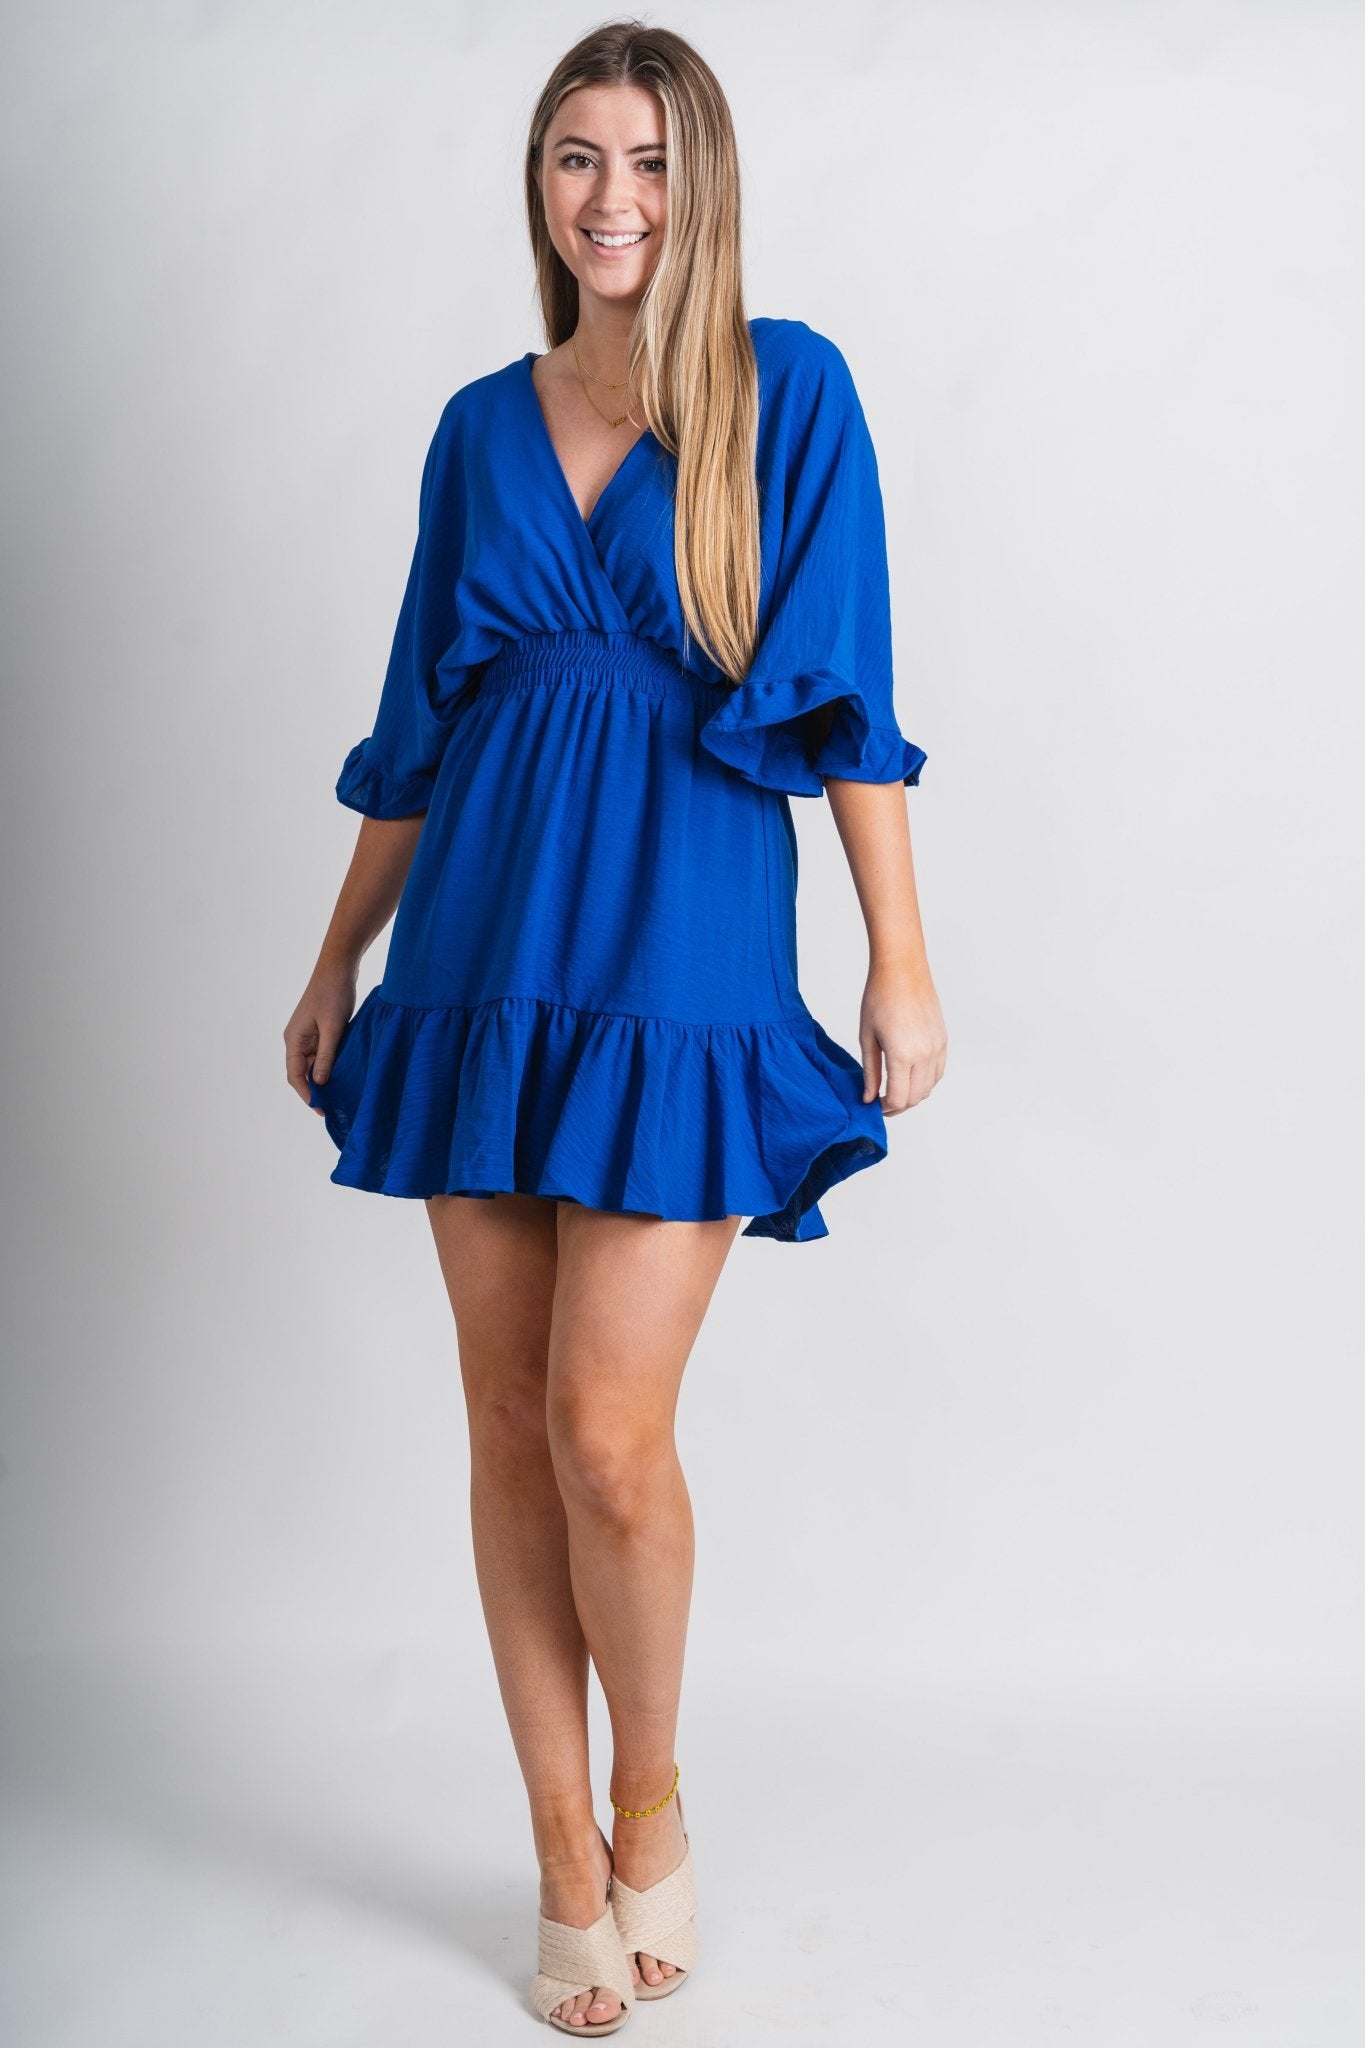 Ruffled sleeve double v dress royal blue - Stylish dress - Trendy Staycation Outfits at Lush Fashion Lounge Boutique in Oklahoma City